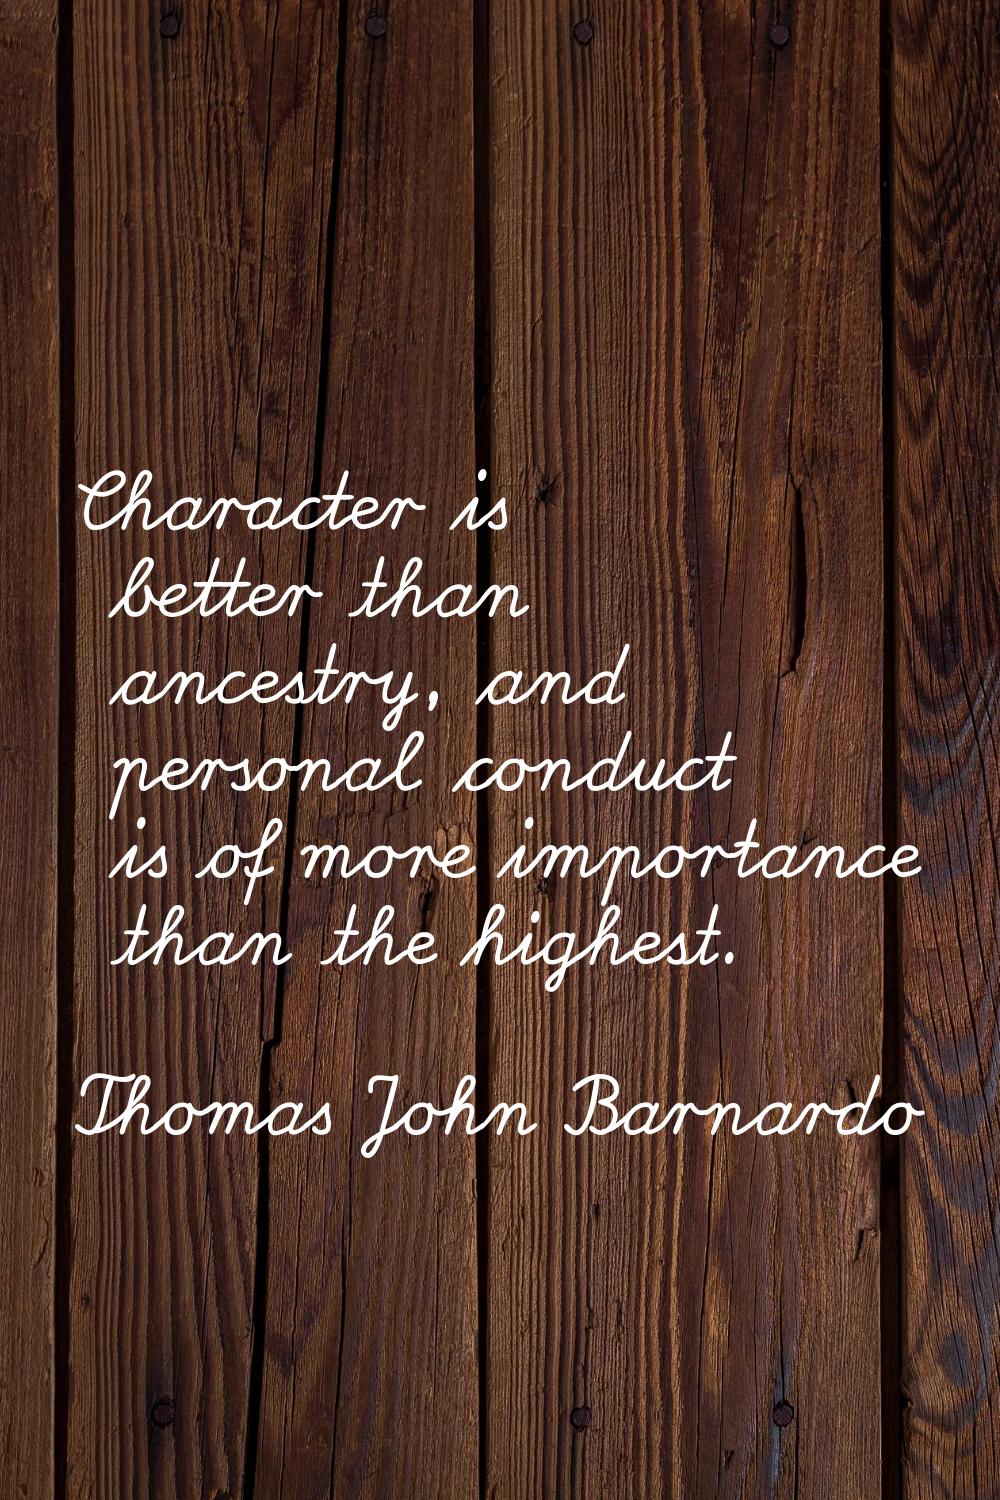 Character is better than ancestry, and personal conduct is of more importance than the highest.